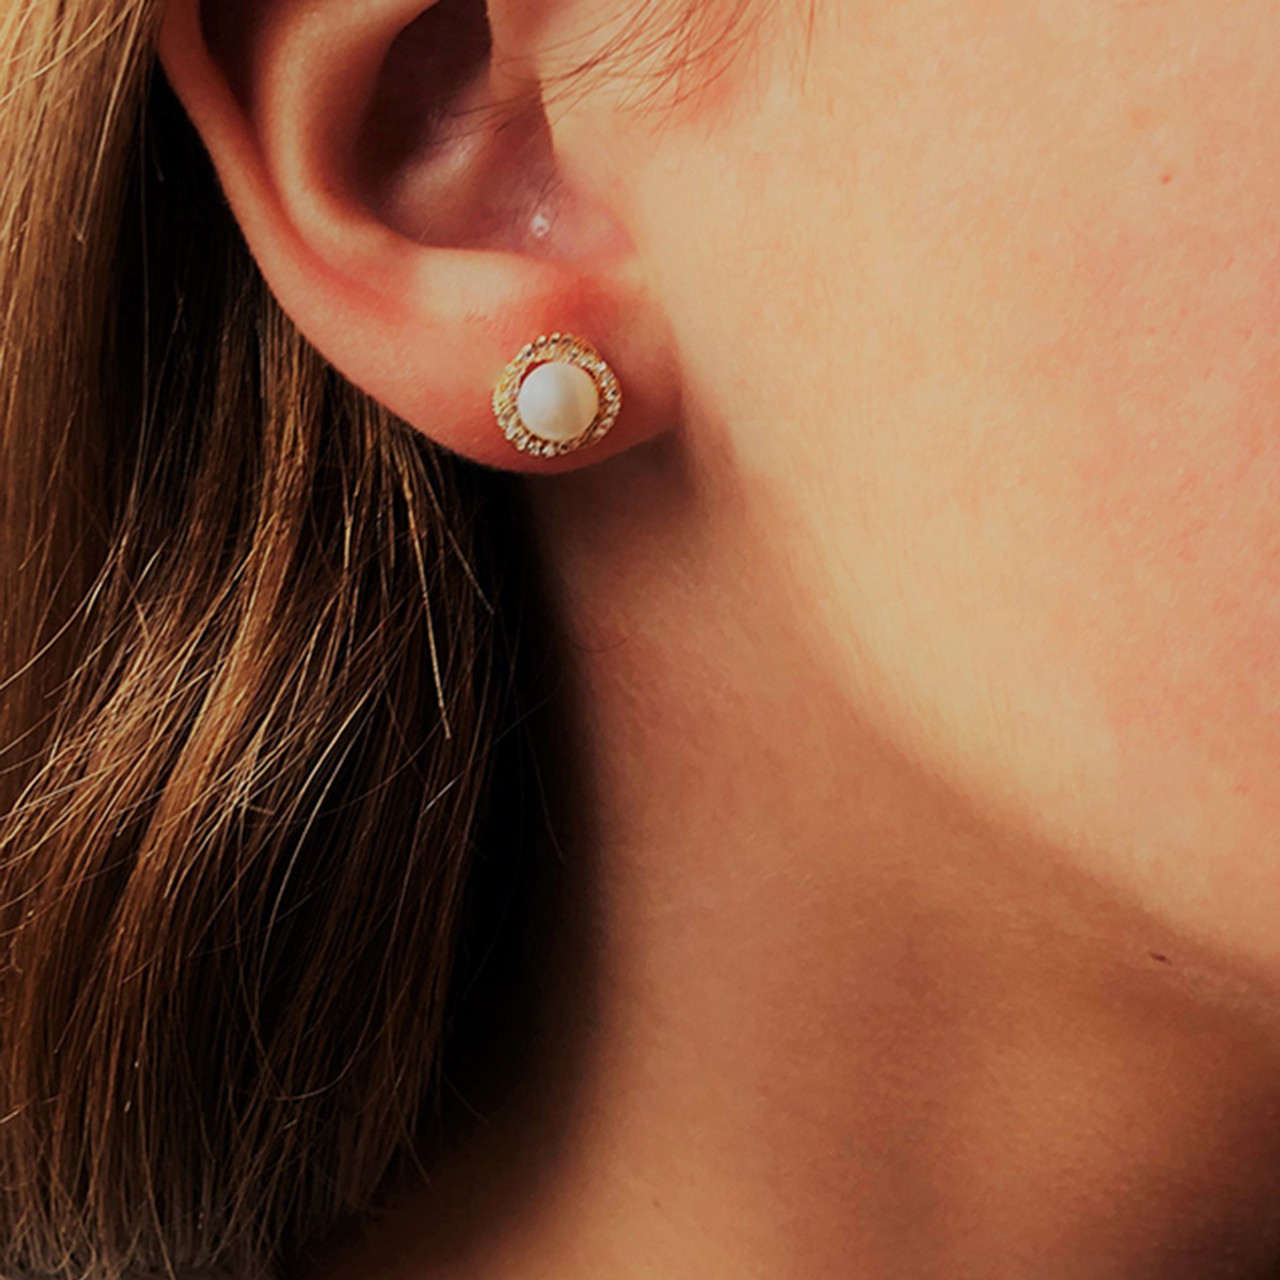 Aggregate more than 134 small crystal stud earrings best